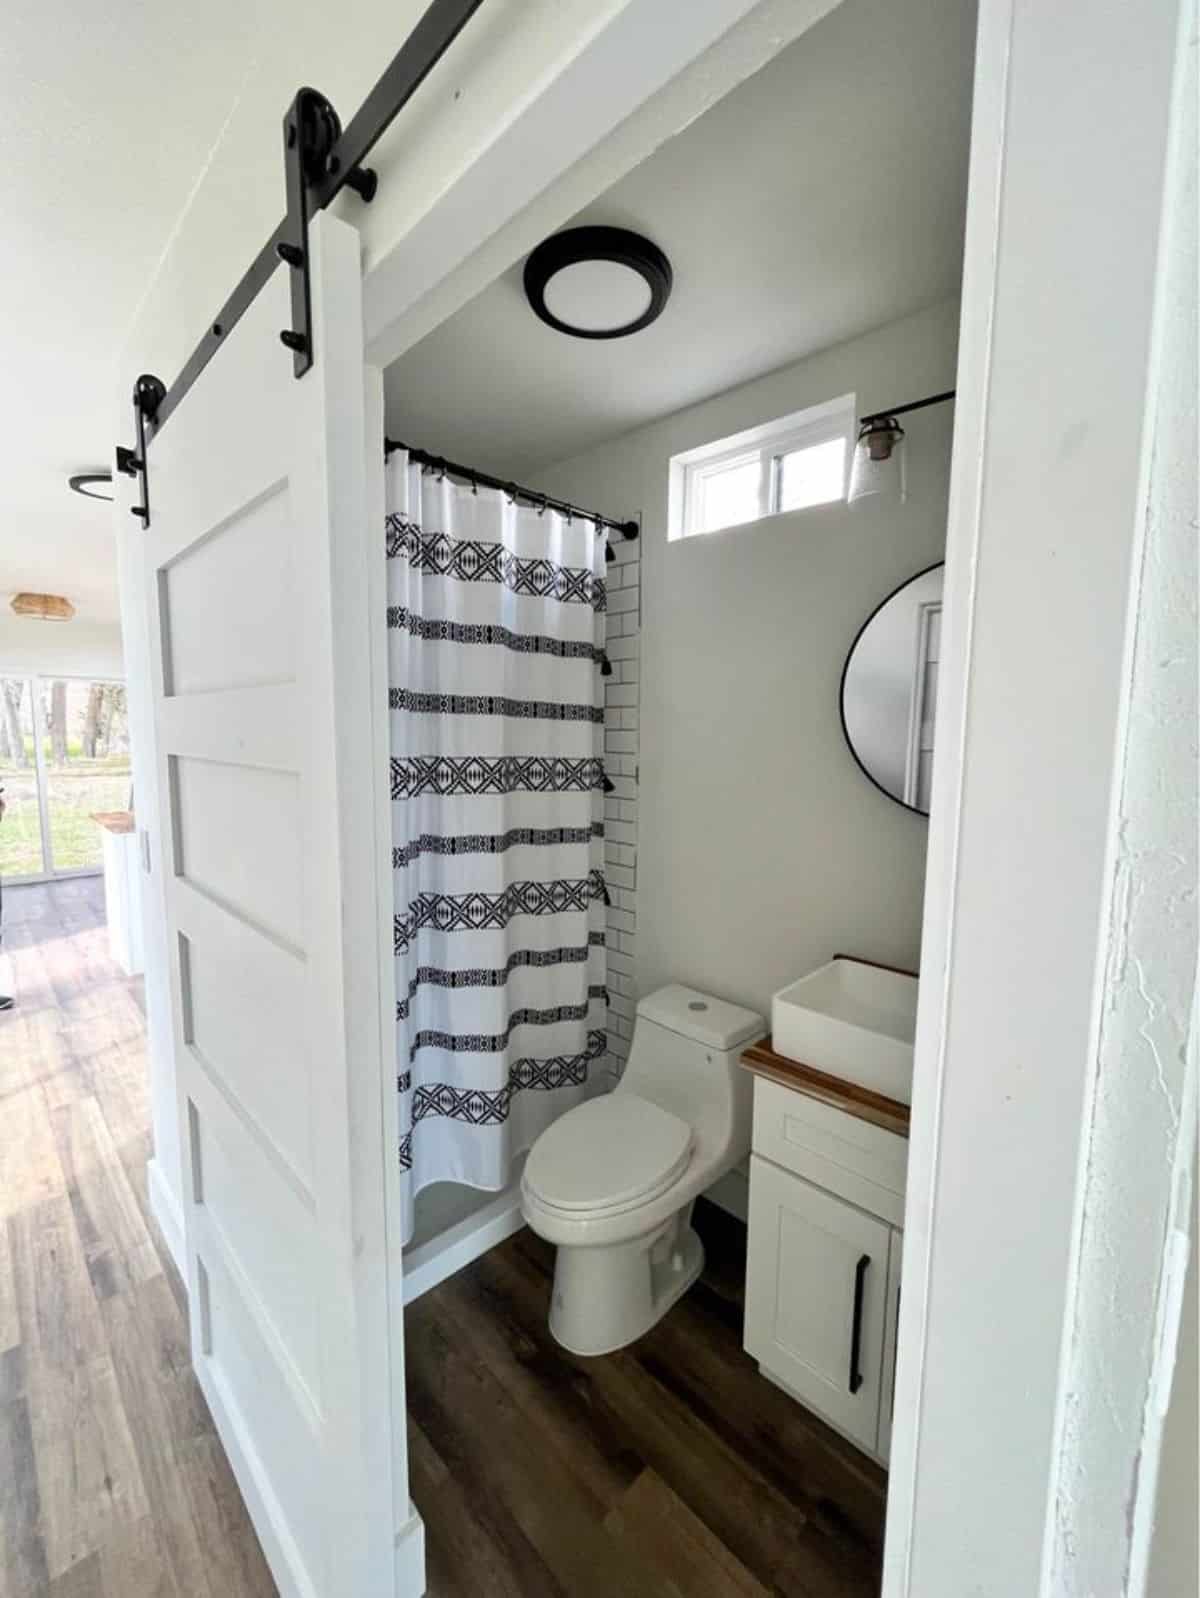 bathroom of shipping container home has all the standard fittings